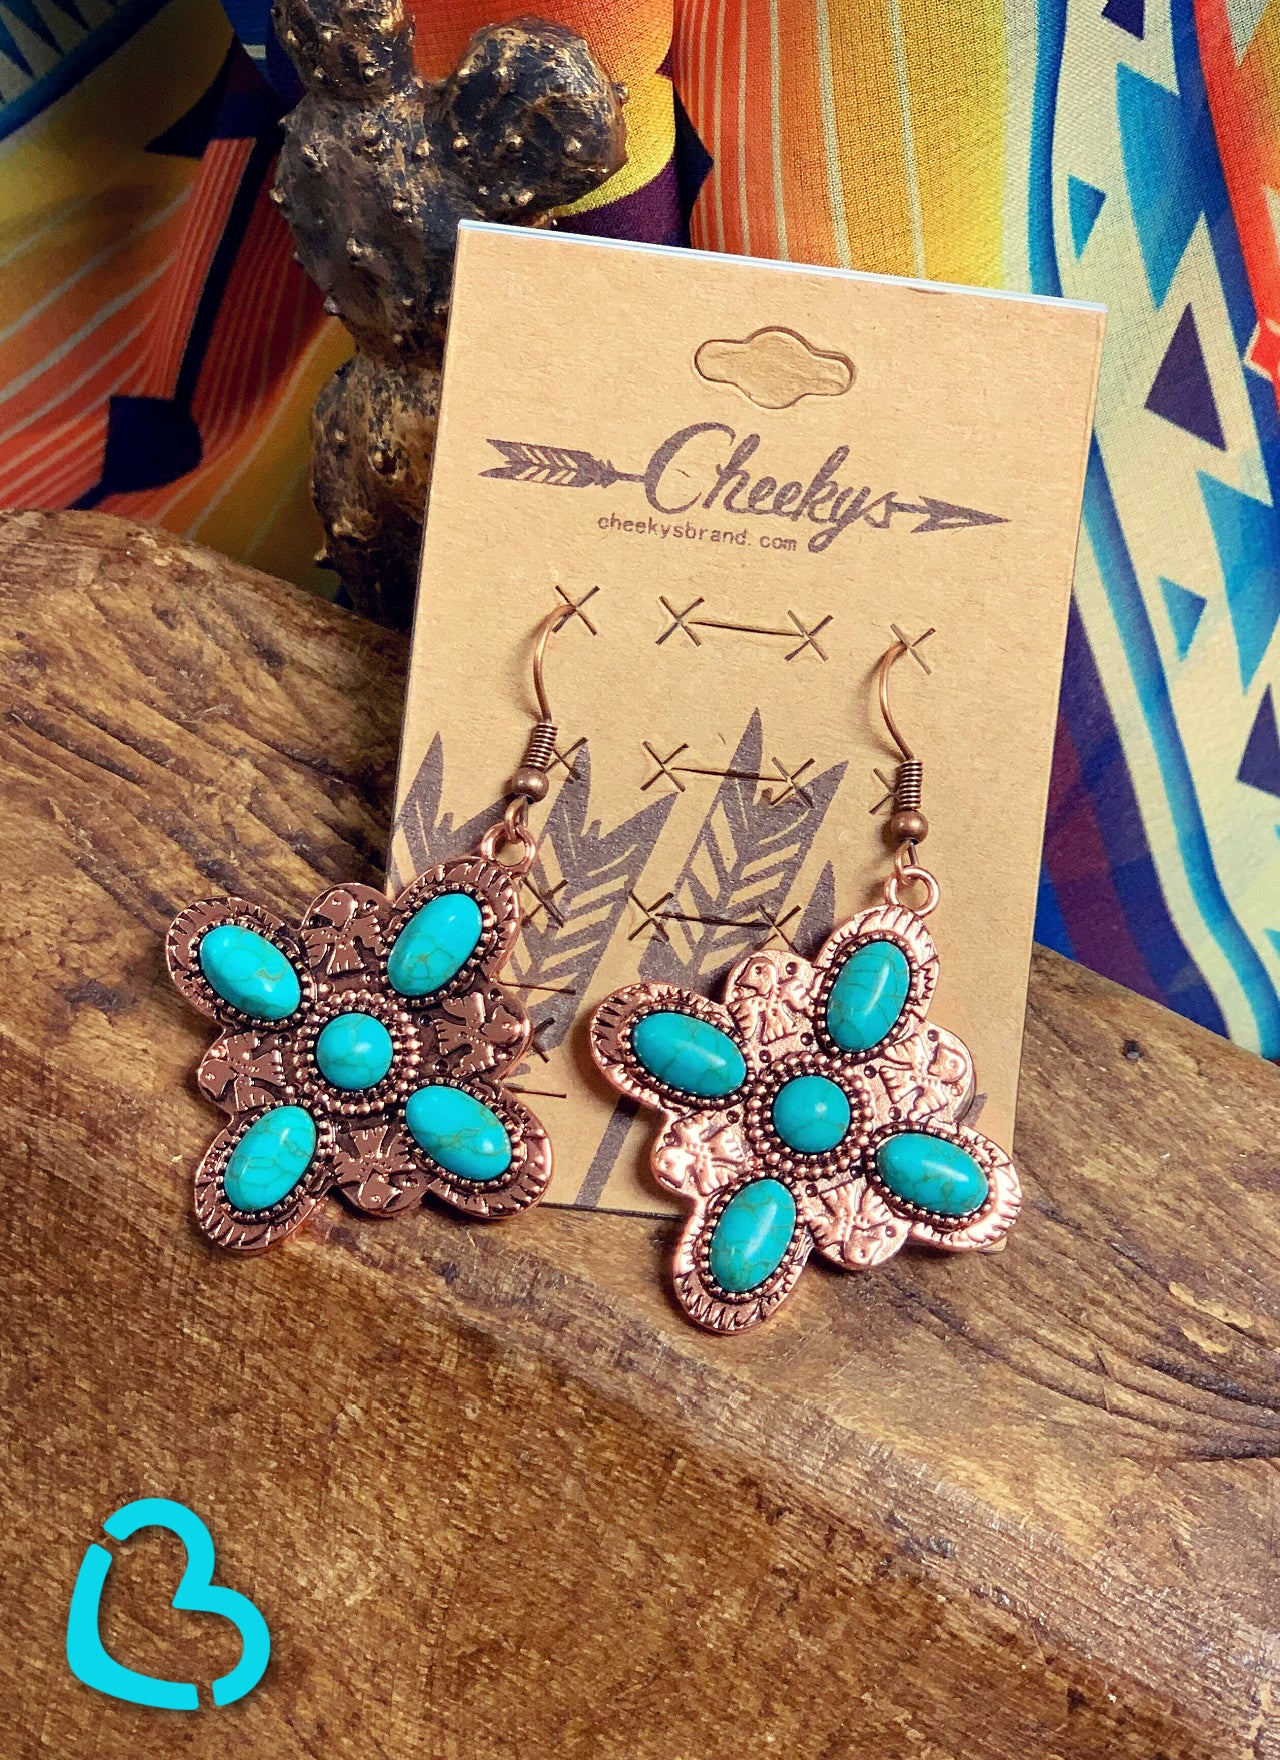 The Starburst Earrings in Turquoise and Copper Jewelry 18 